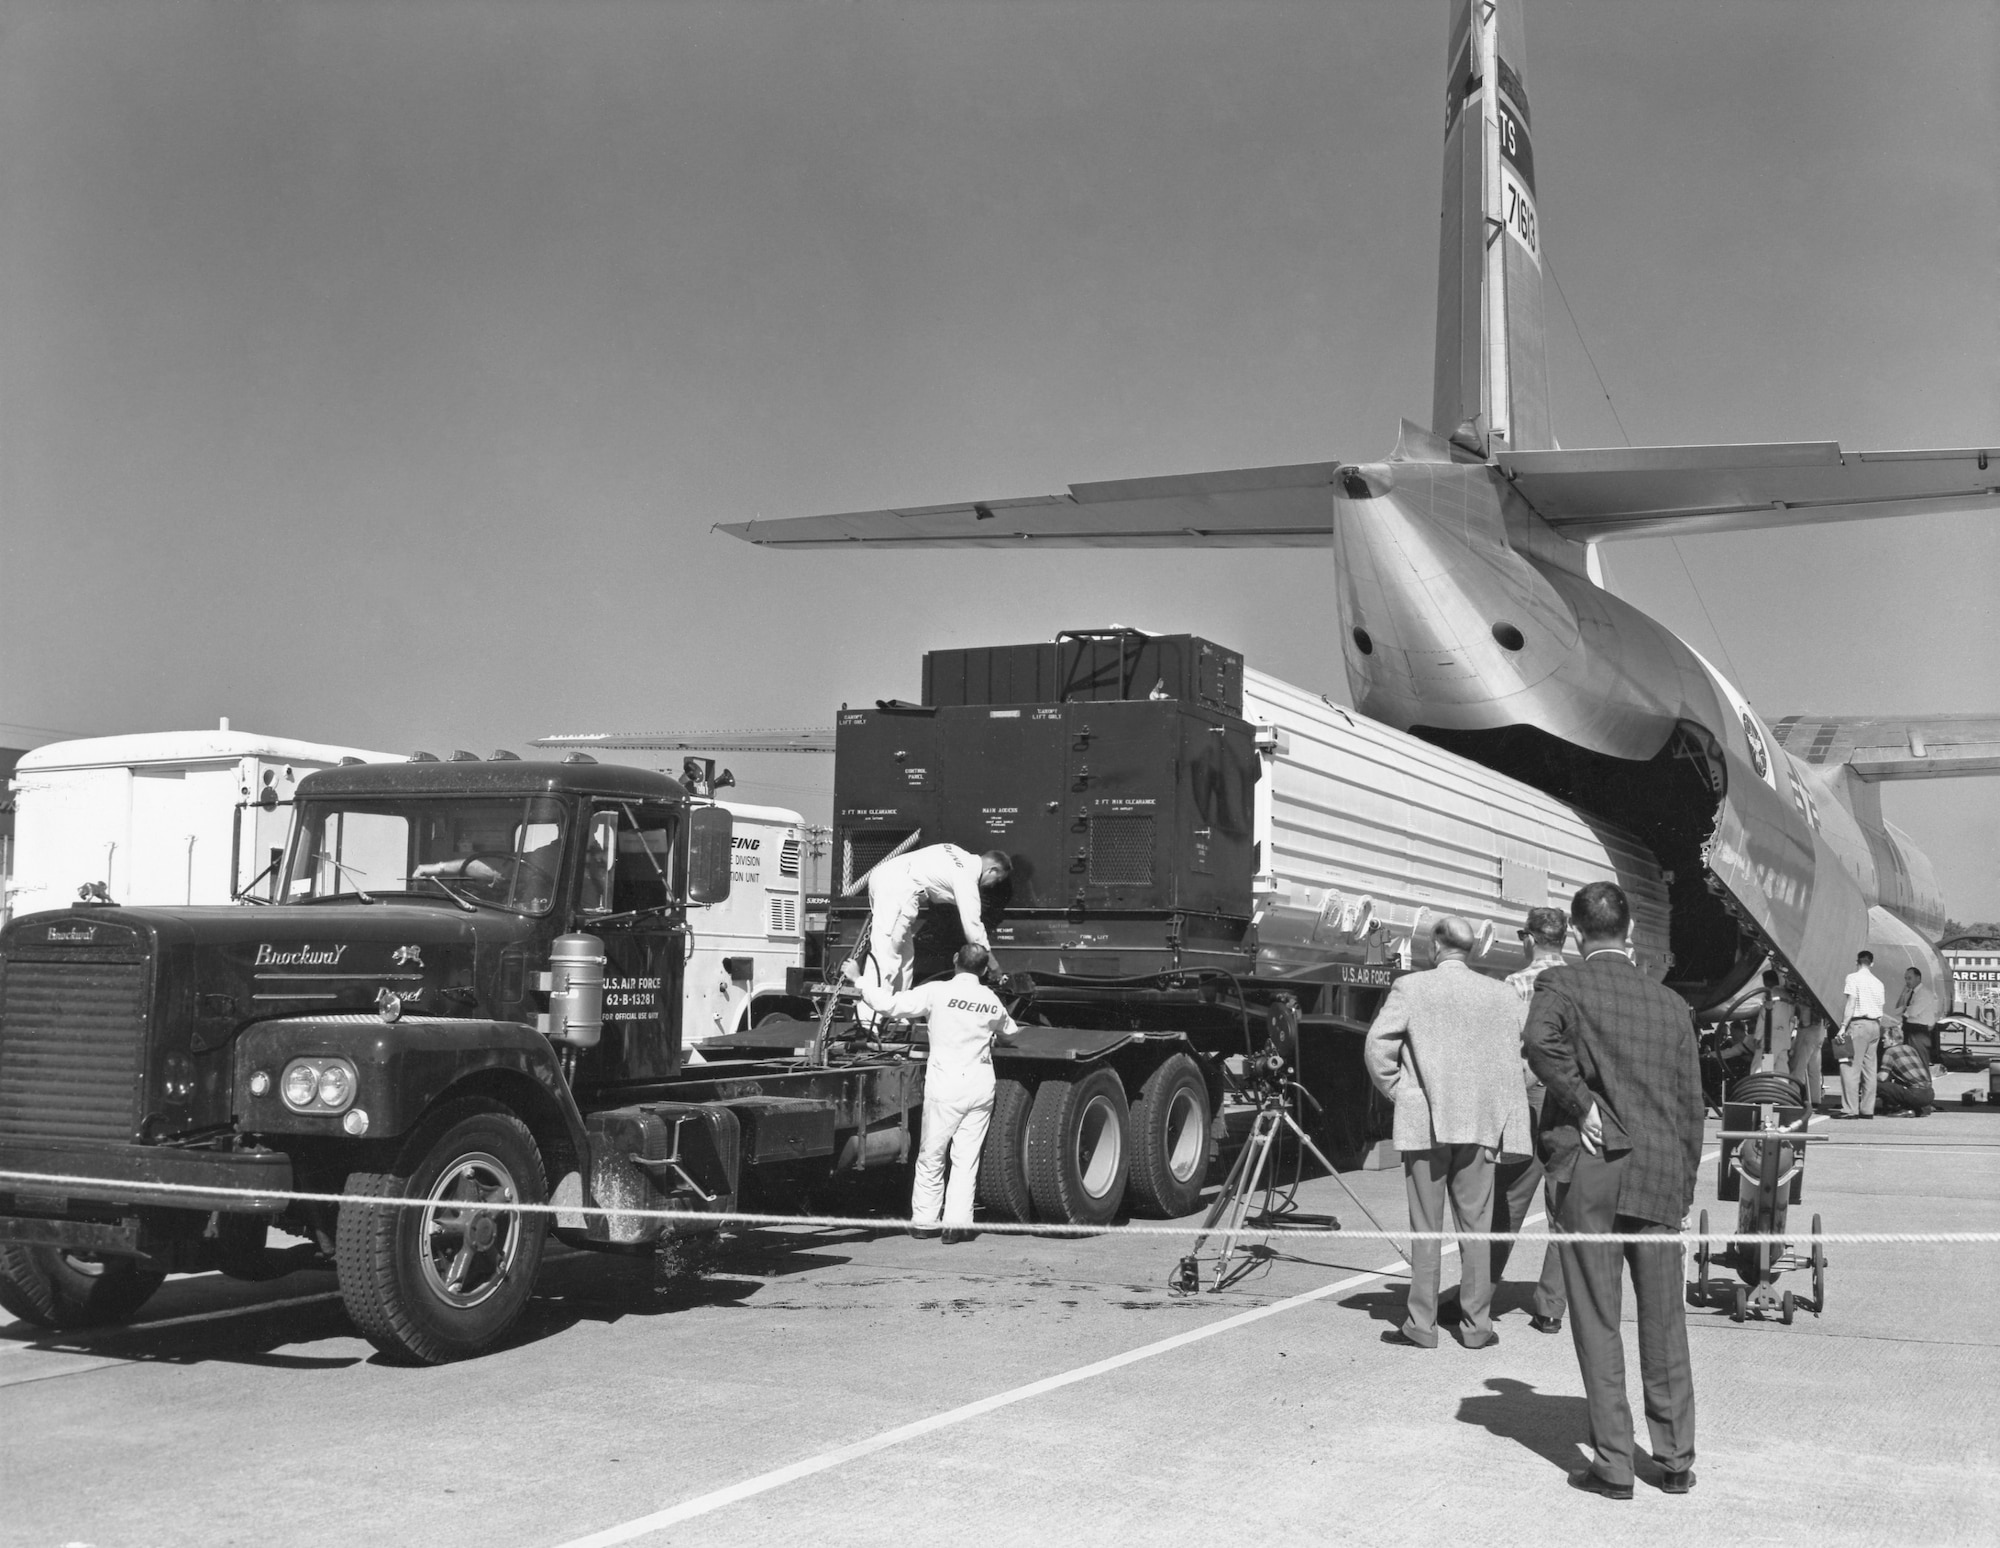 Personnel loading a Minuteman missile into the back of a C-133B aircraft.